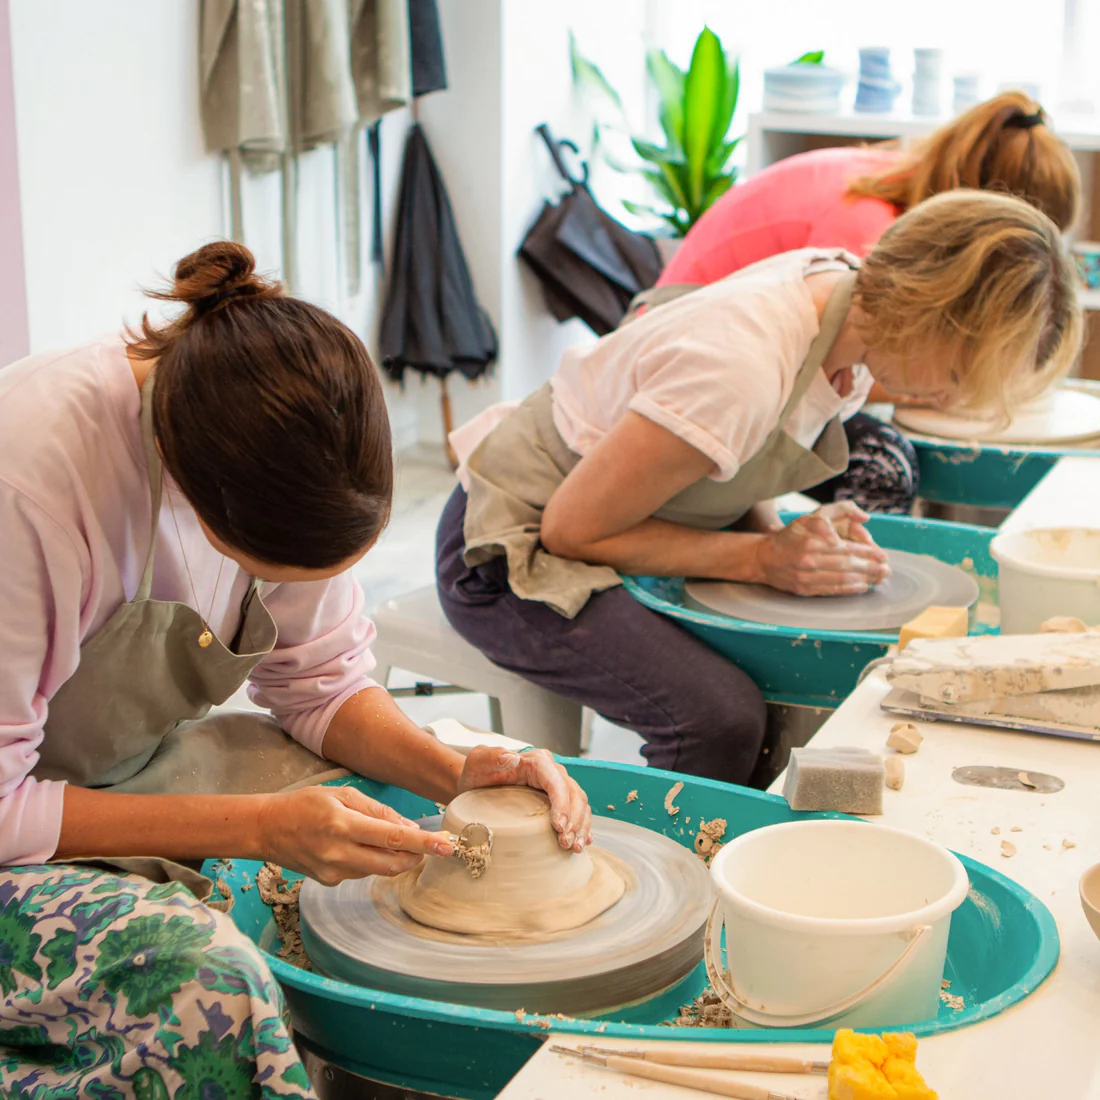 Week 2 of Exploring Clay Open Studio: Learning hand-building techniques